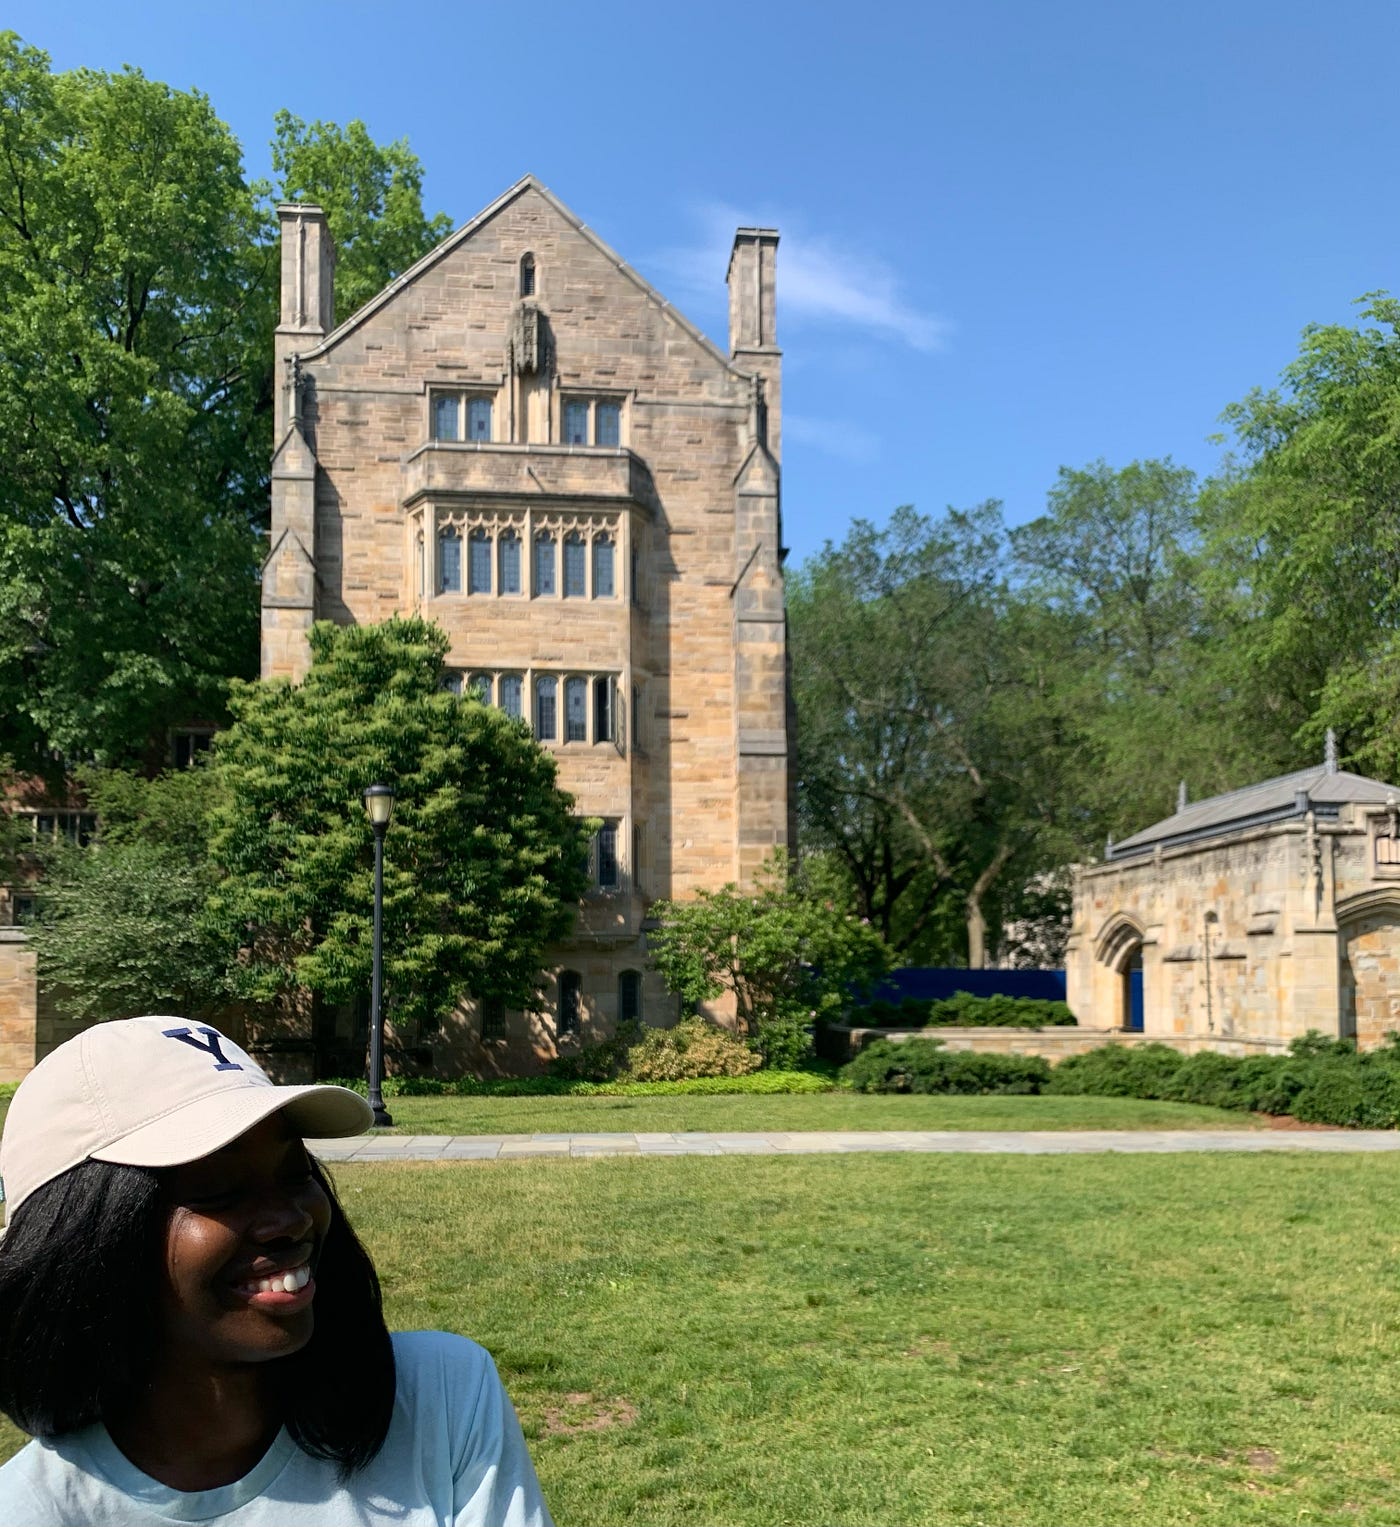 A photo CrossCampus at Yale celebrating the end of the semester.